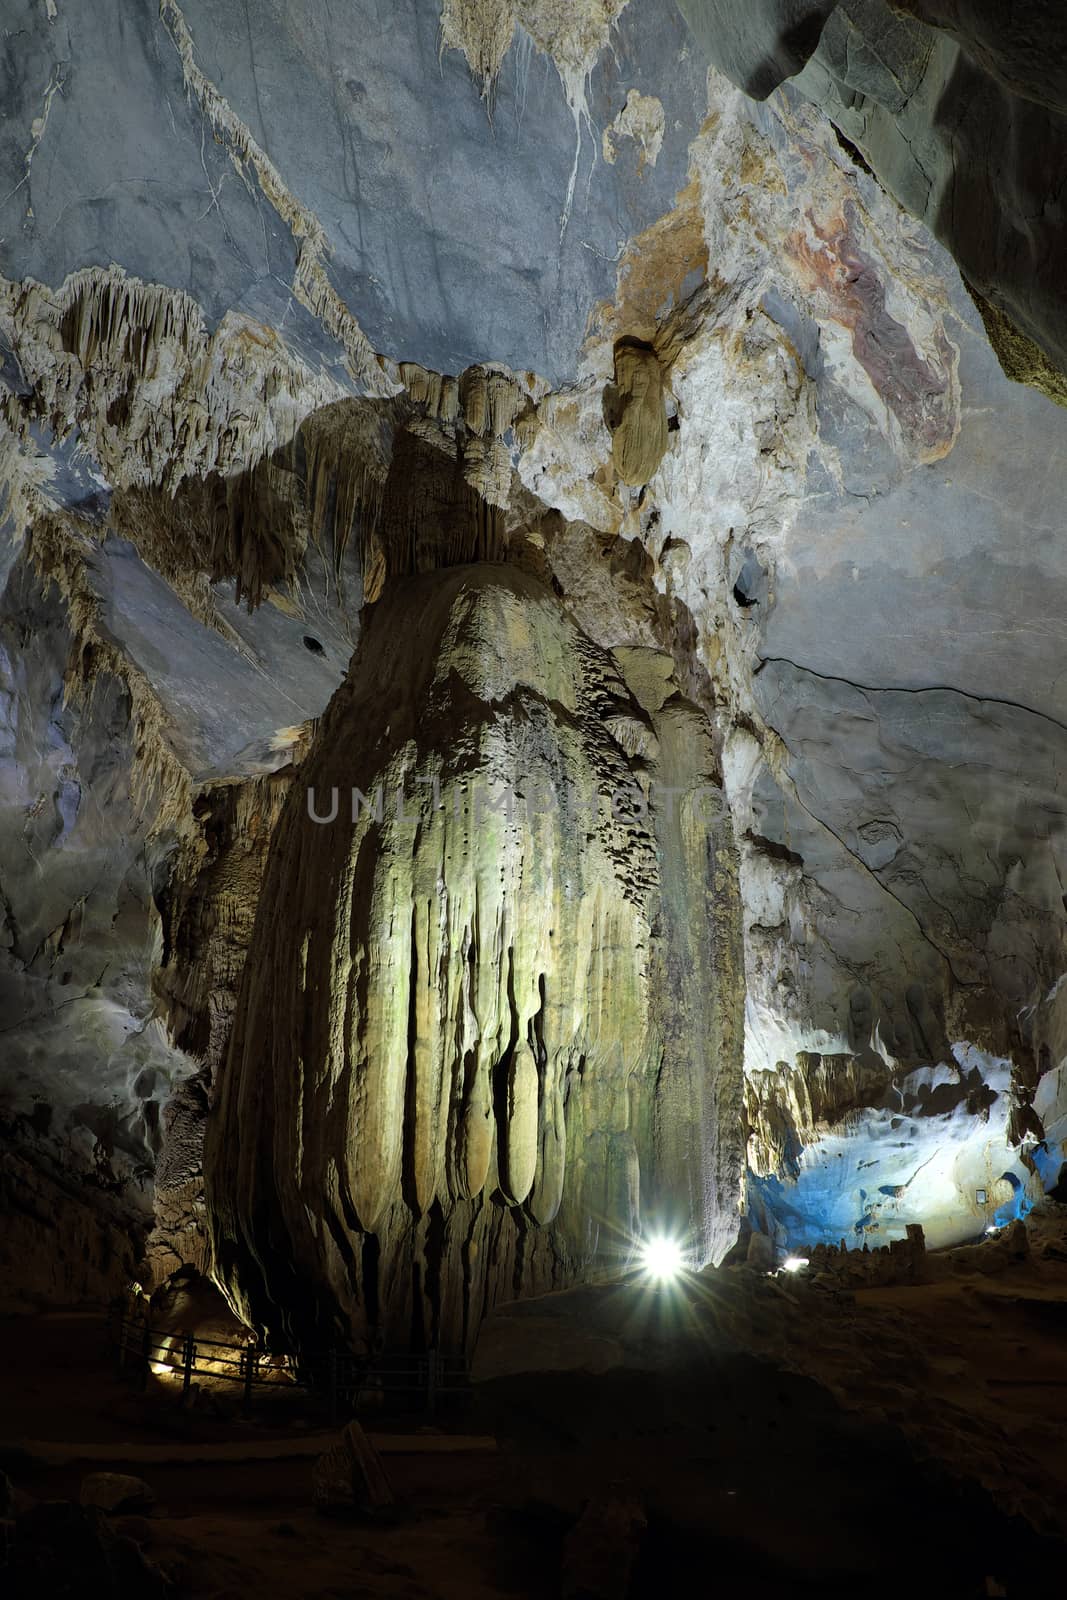 Phong Nha, Ke Bang cave, an amazing, wonderful cavern at Bo Trach, Quang Binh, Vietnam, is world heritage of Viet Nam,  impression formation, abstract shape from stalactite, wonderful place for travel